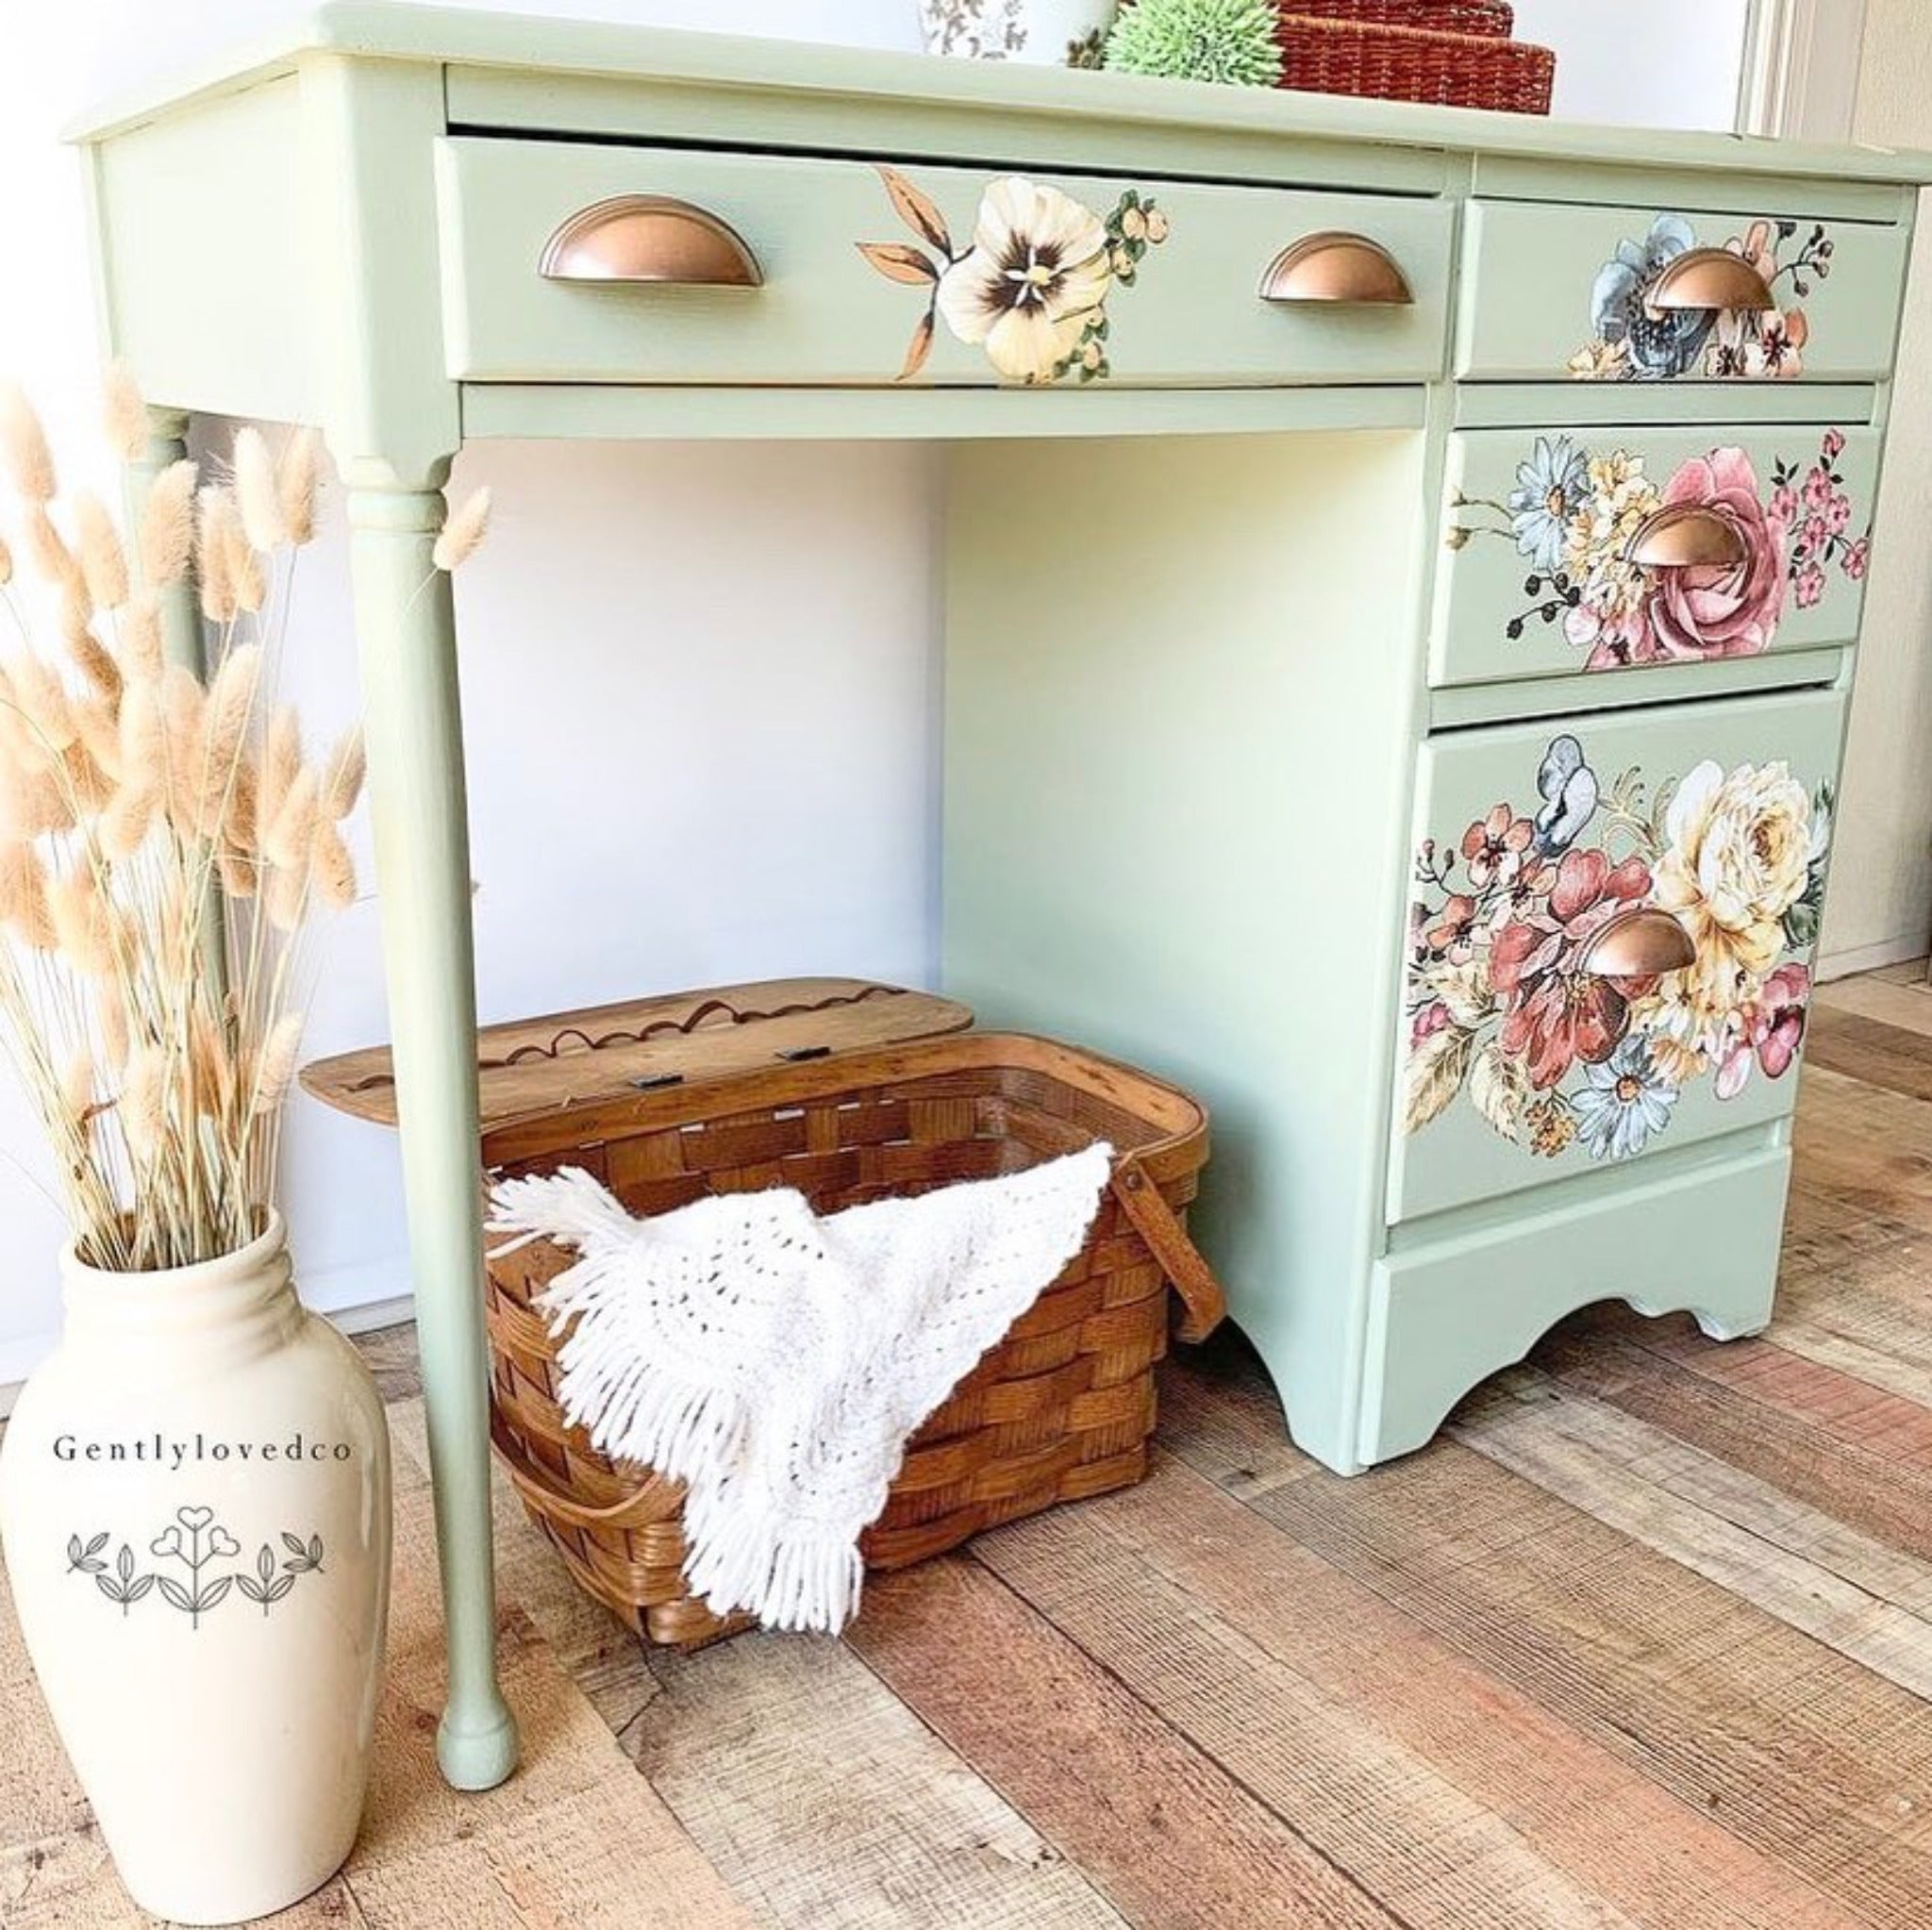 A vintage desk refurbished by Gently Loved Company is painted pale green and features ReDesign with Prima's Ruby Rose rub-on transfer on its 4 drawers.